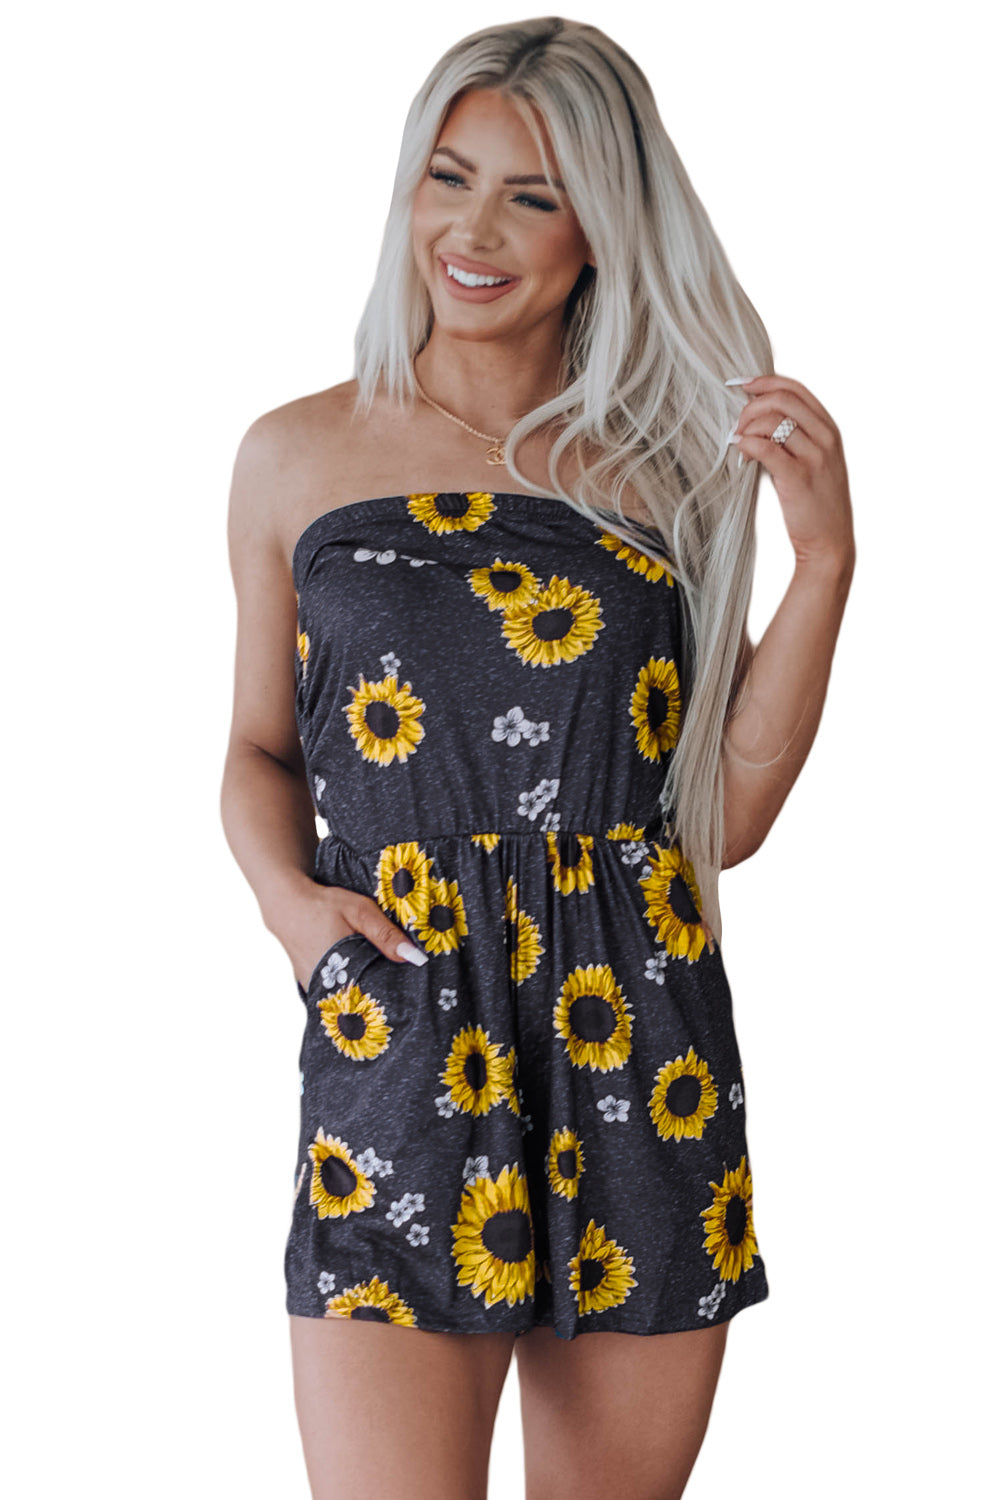 LC642083-7-S, LC642083-7-M, LC642083-7-L, LC642083-7-XL, Yellow  Floral Print Bandeau Romper with Pockets Gay Palm Leaves Print Bandeau Romper with Pockets Multicolor Tie-dye Print Bandeau Romper with Pockets